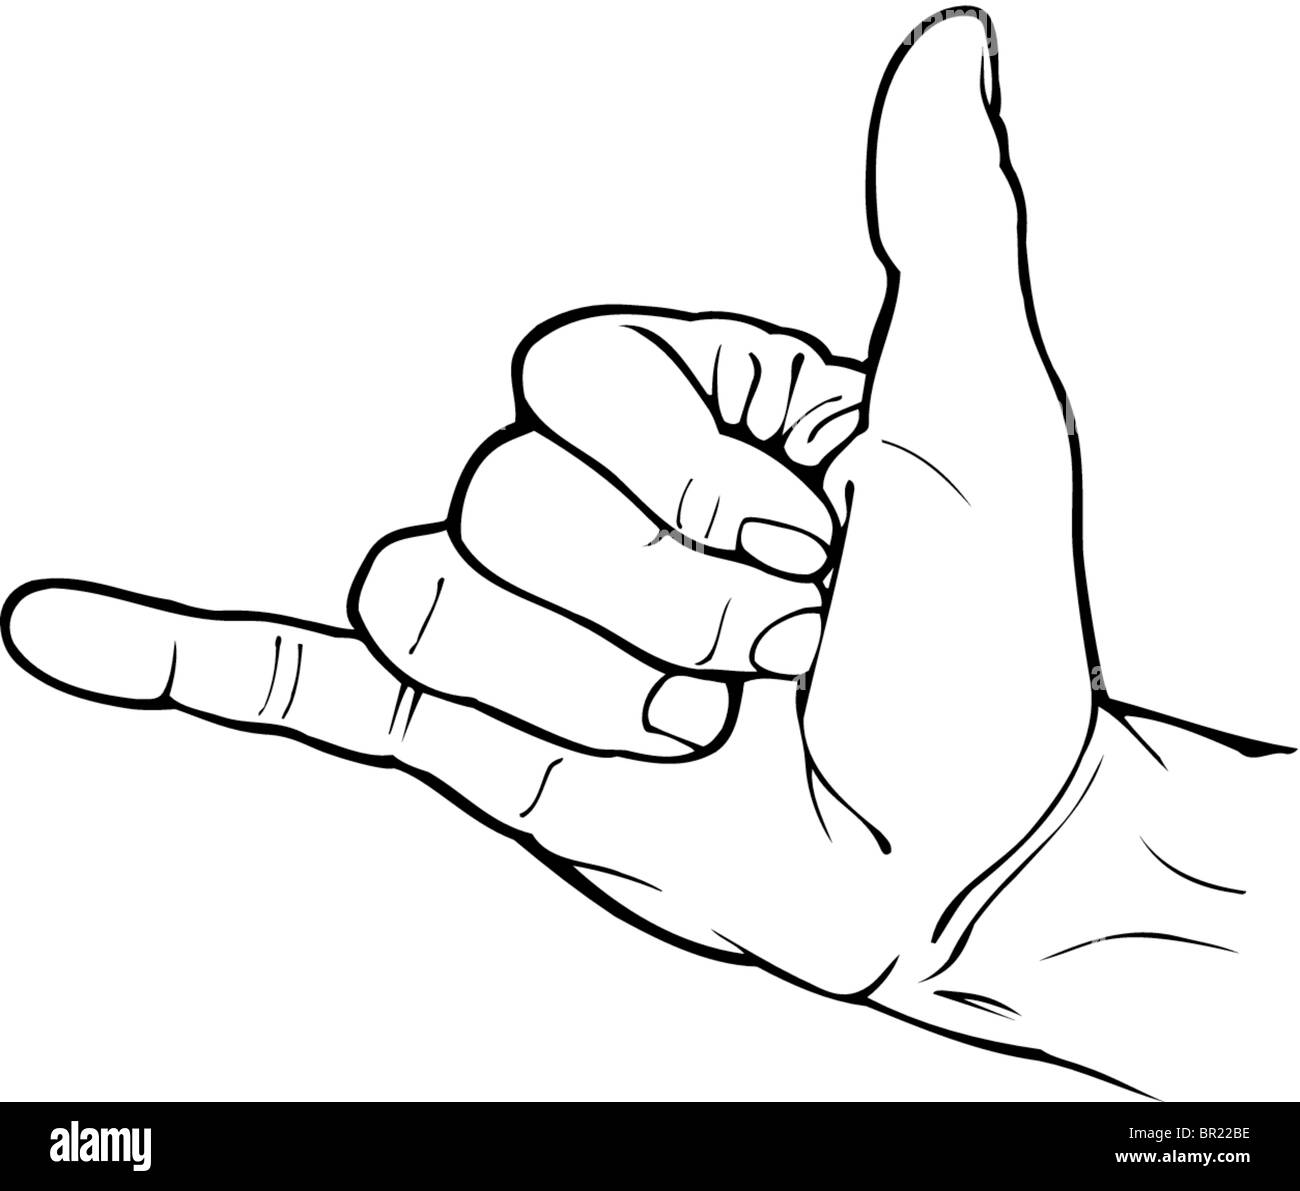 Drawing hang loose symbol background Black and White Stock Photos & Images  - Alamy